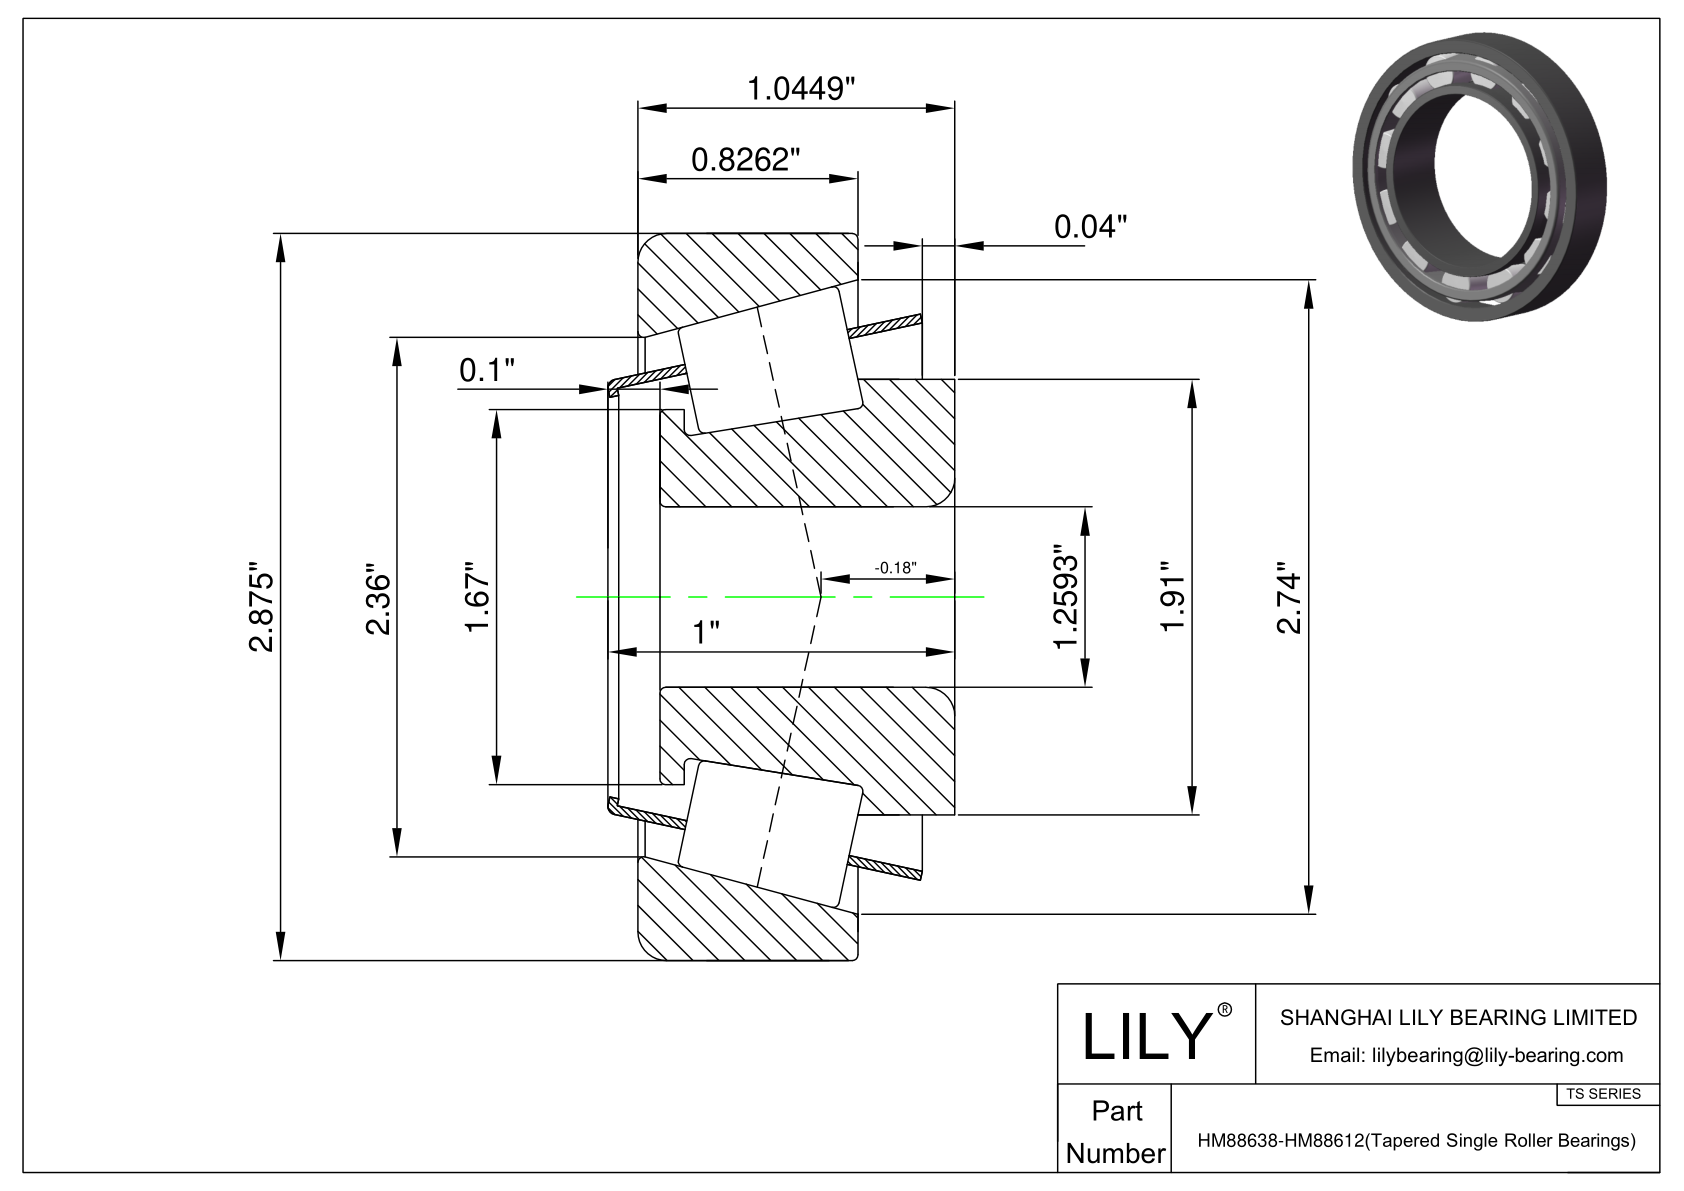 HM88638-HM88612 TS (Tapered Single Roller Bearings) (Imperial) cad drawing